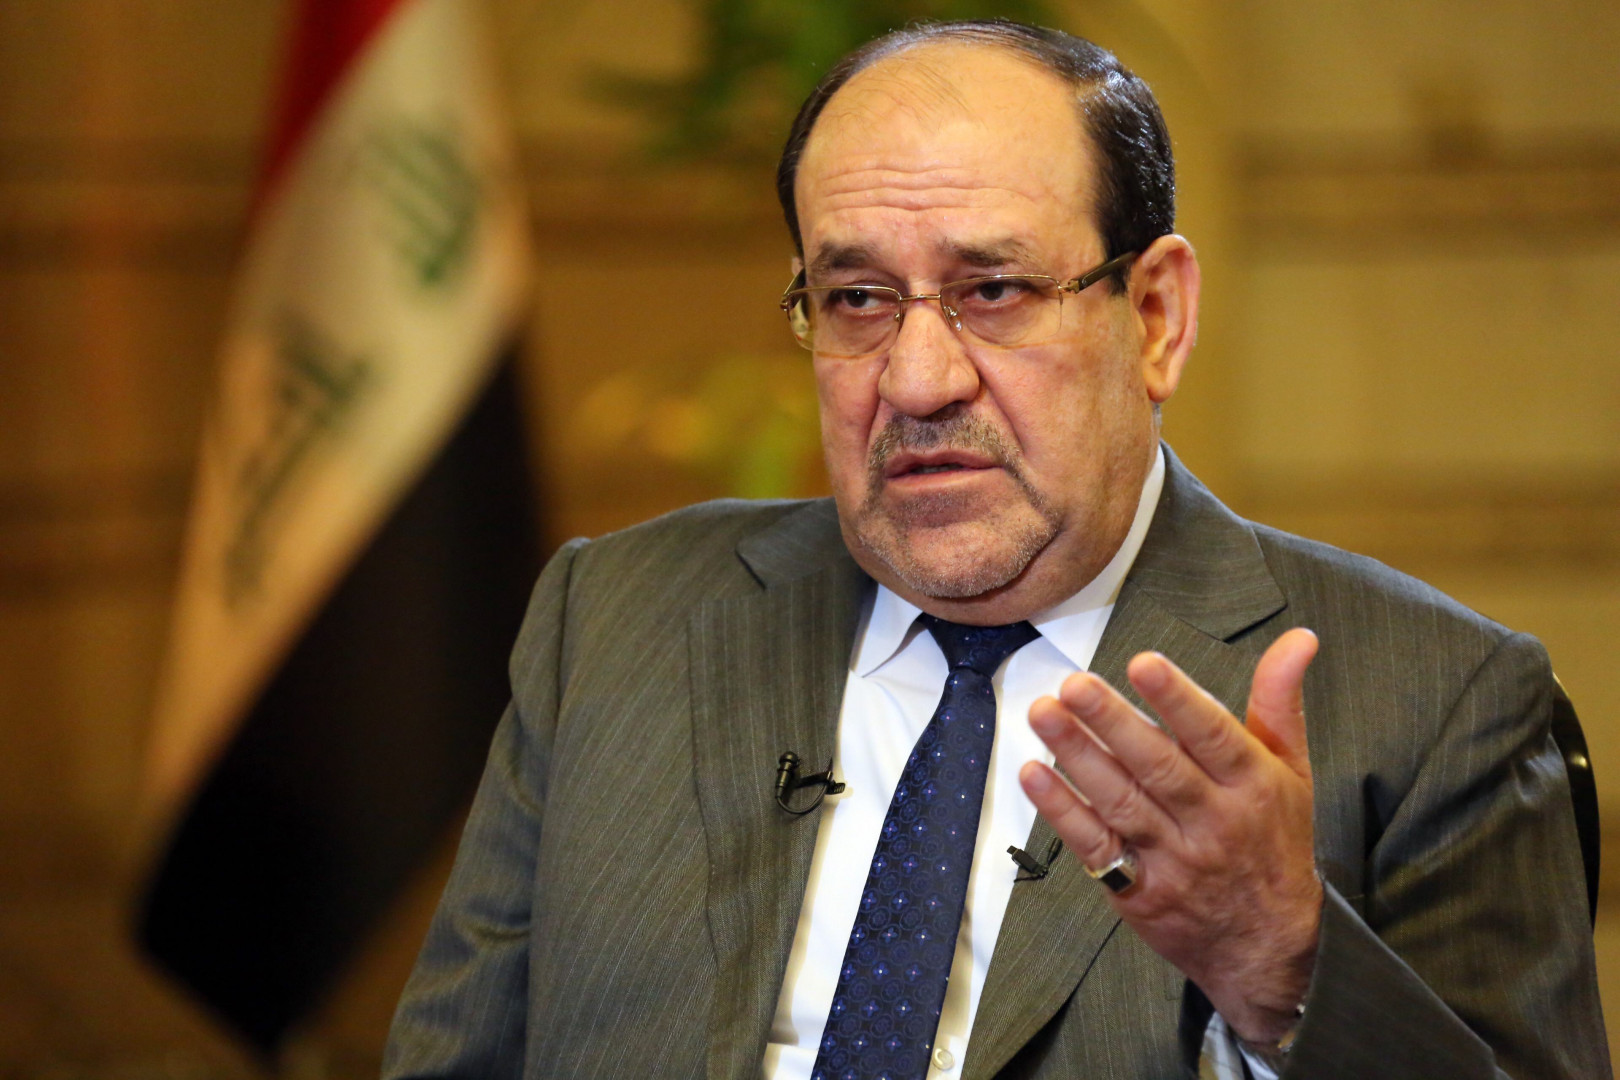 Source: Al-Maliki is in good health condition, not having cancer